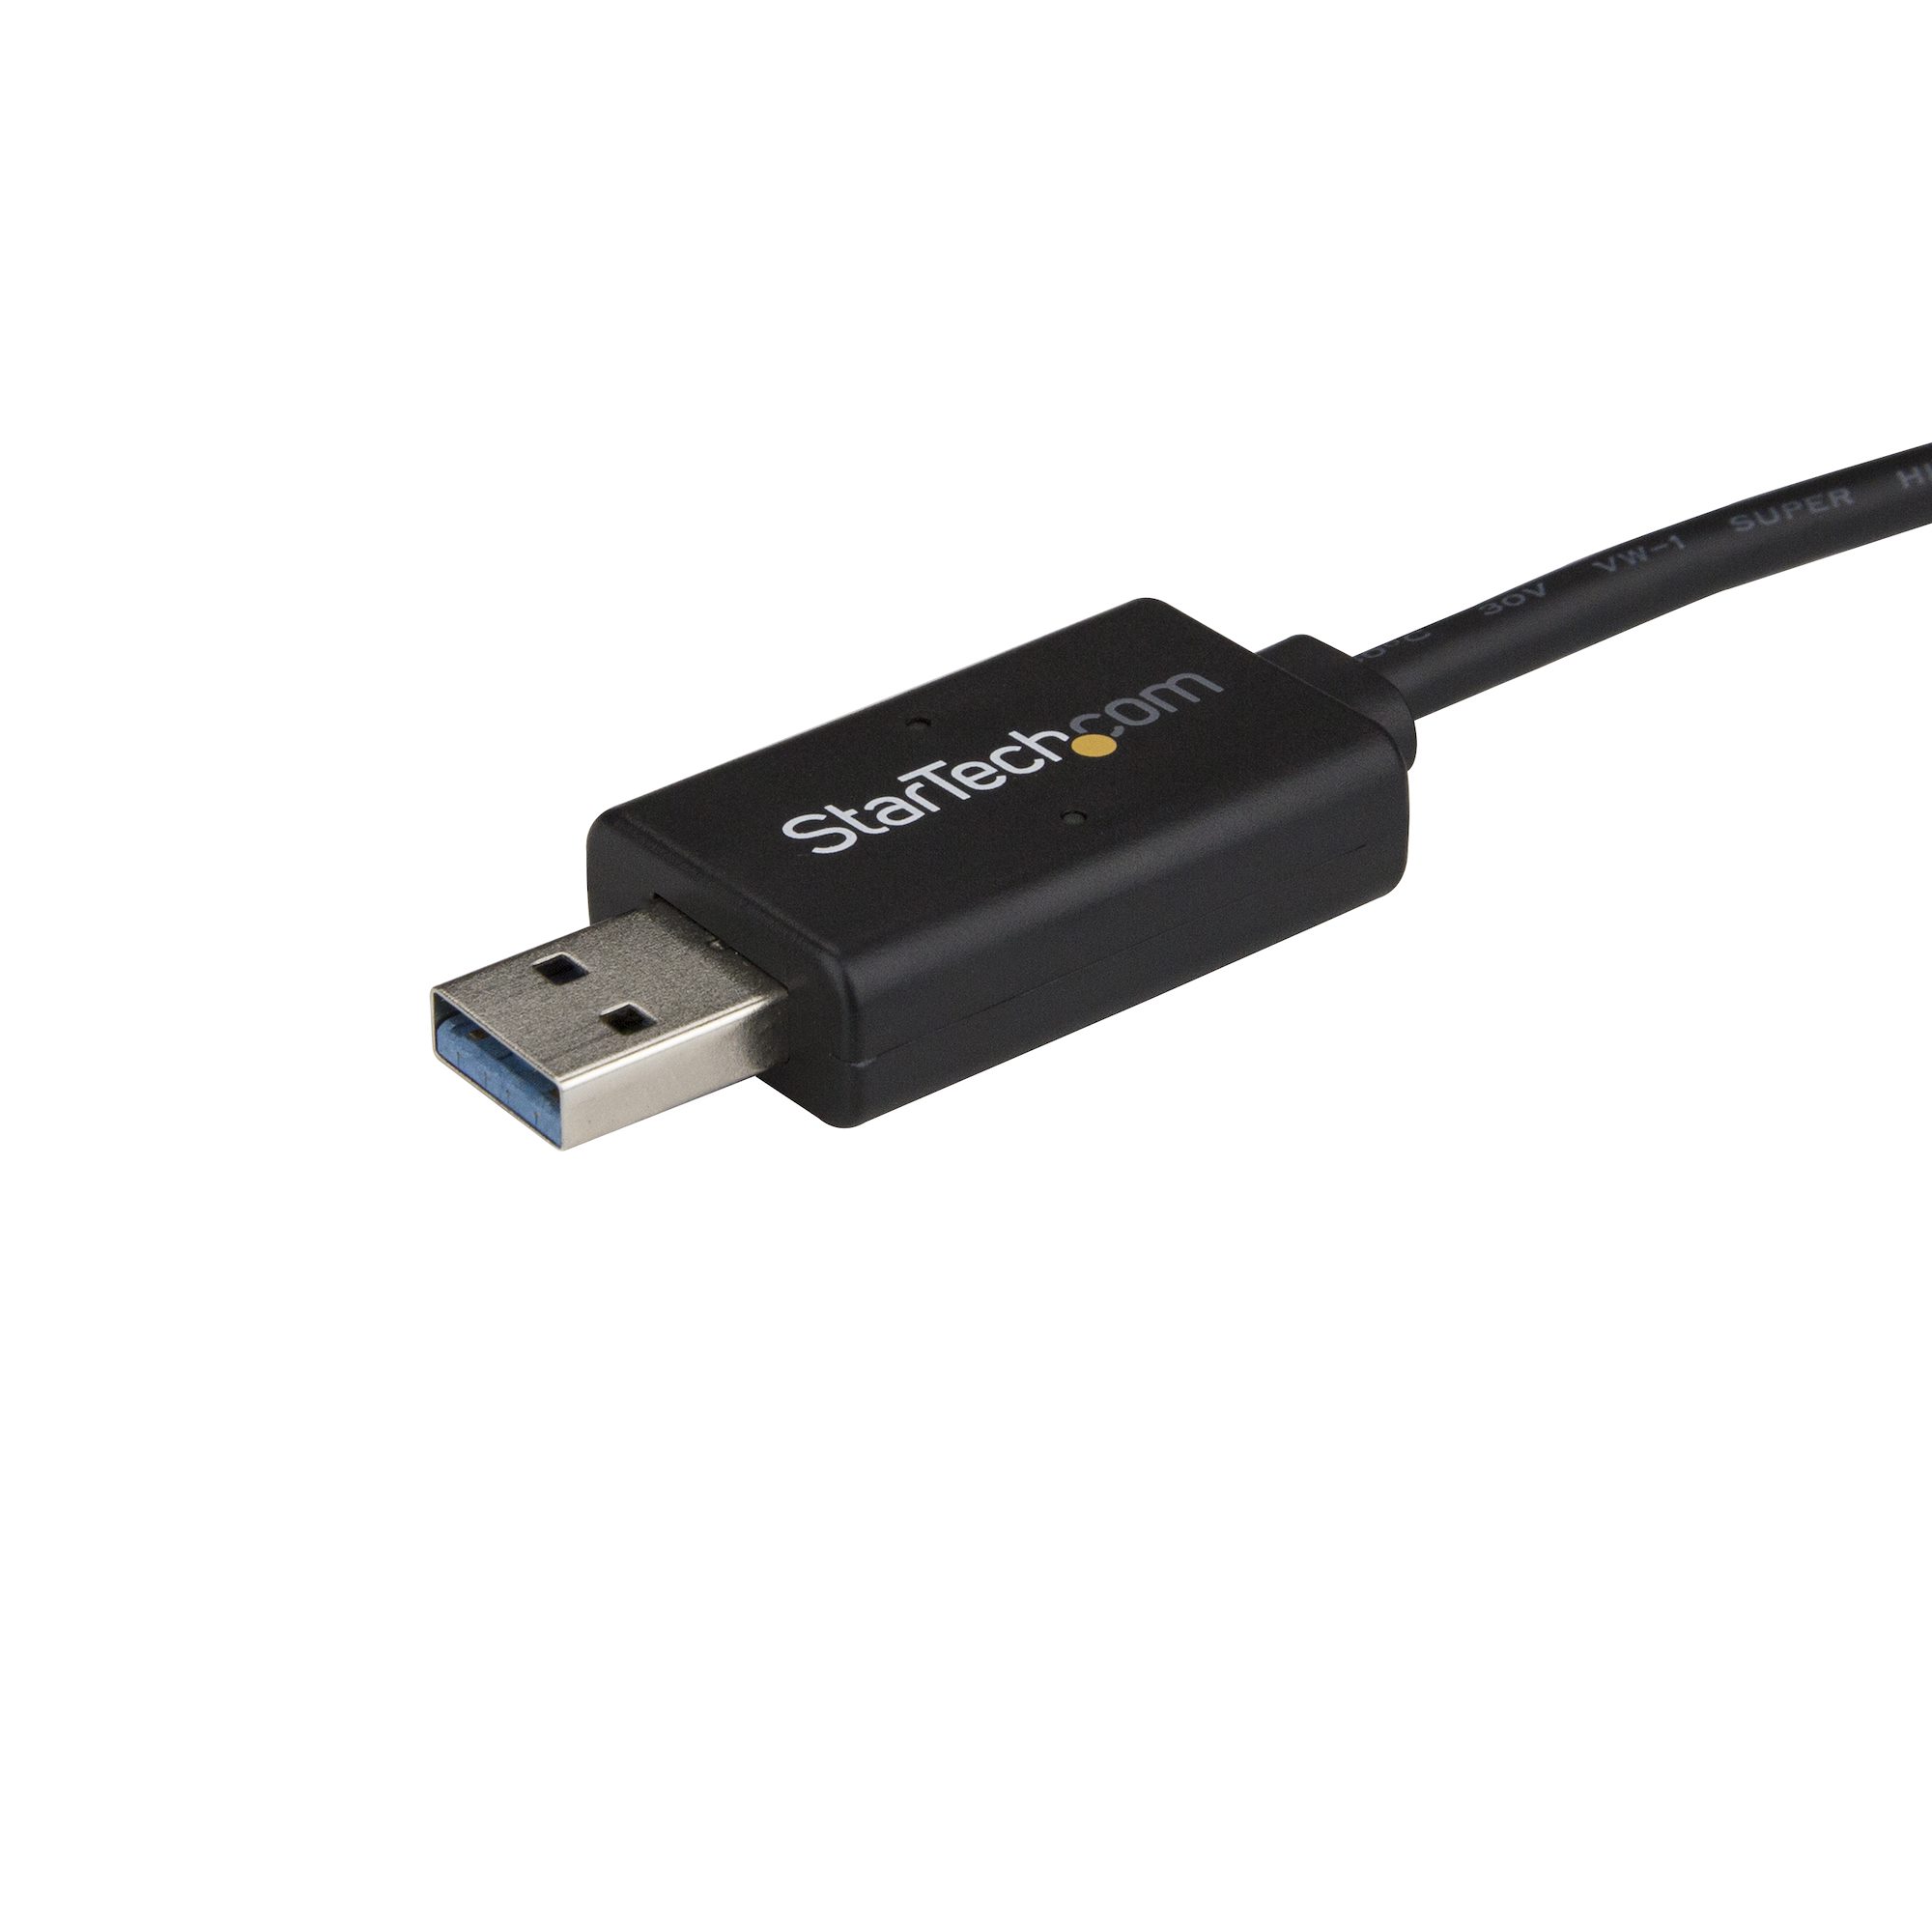 USB 3.0 PC to PC Sync Data Link Cable Online Share File Transfer for Windows Mac 